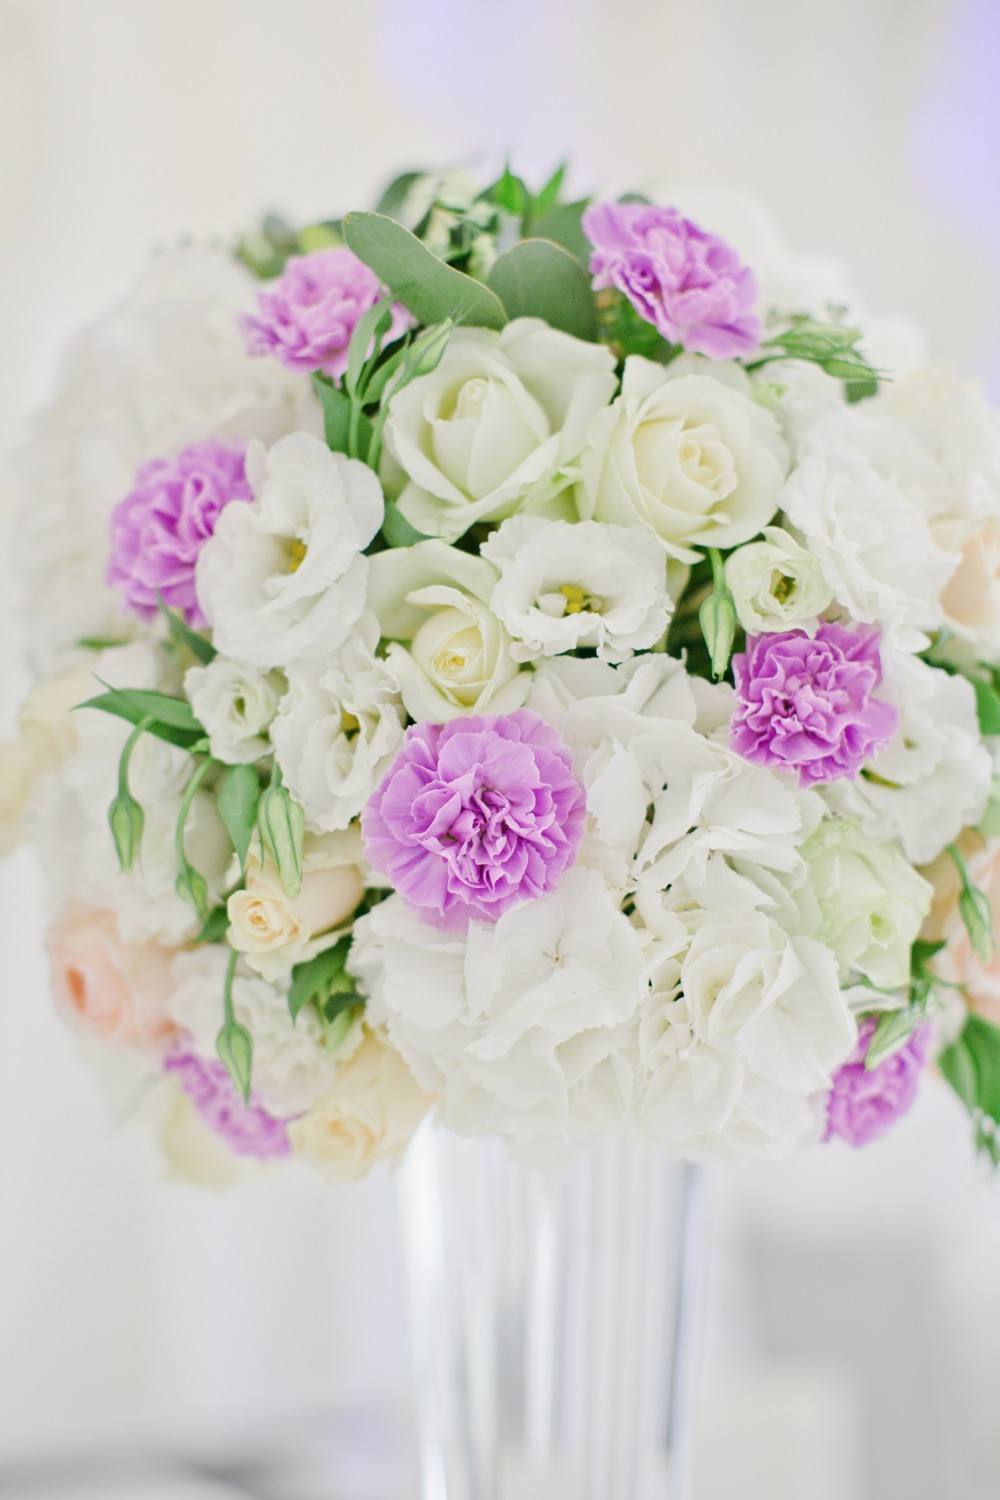 Tall purple and white centerpiece